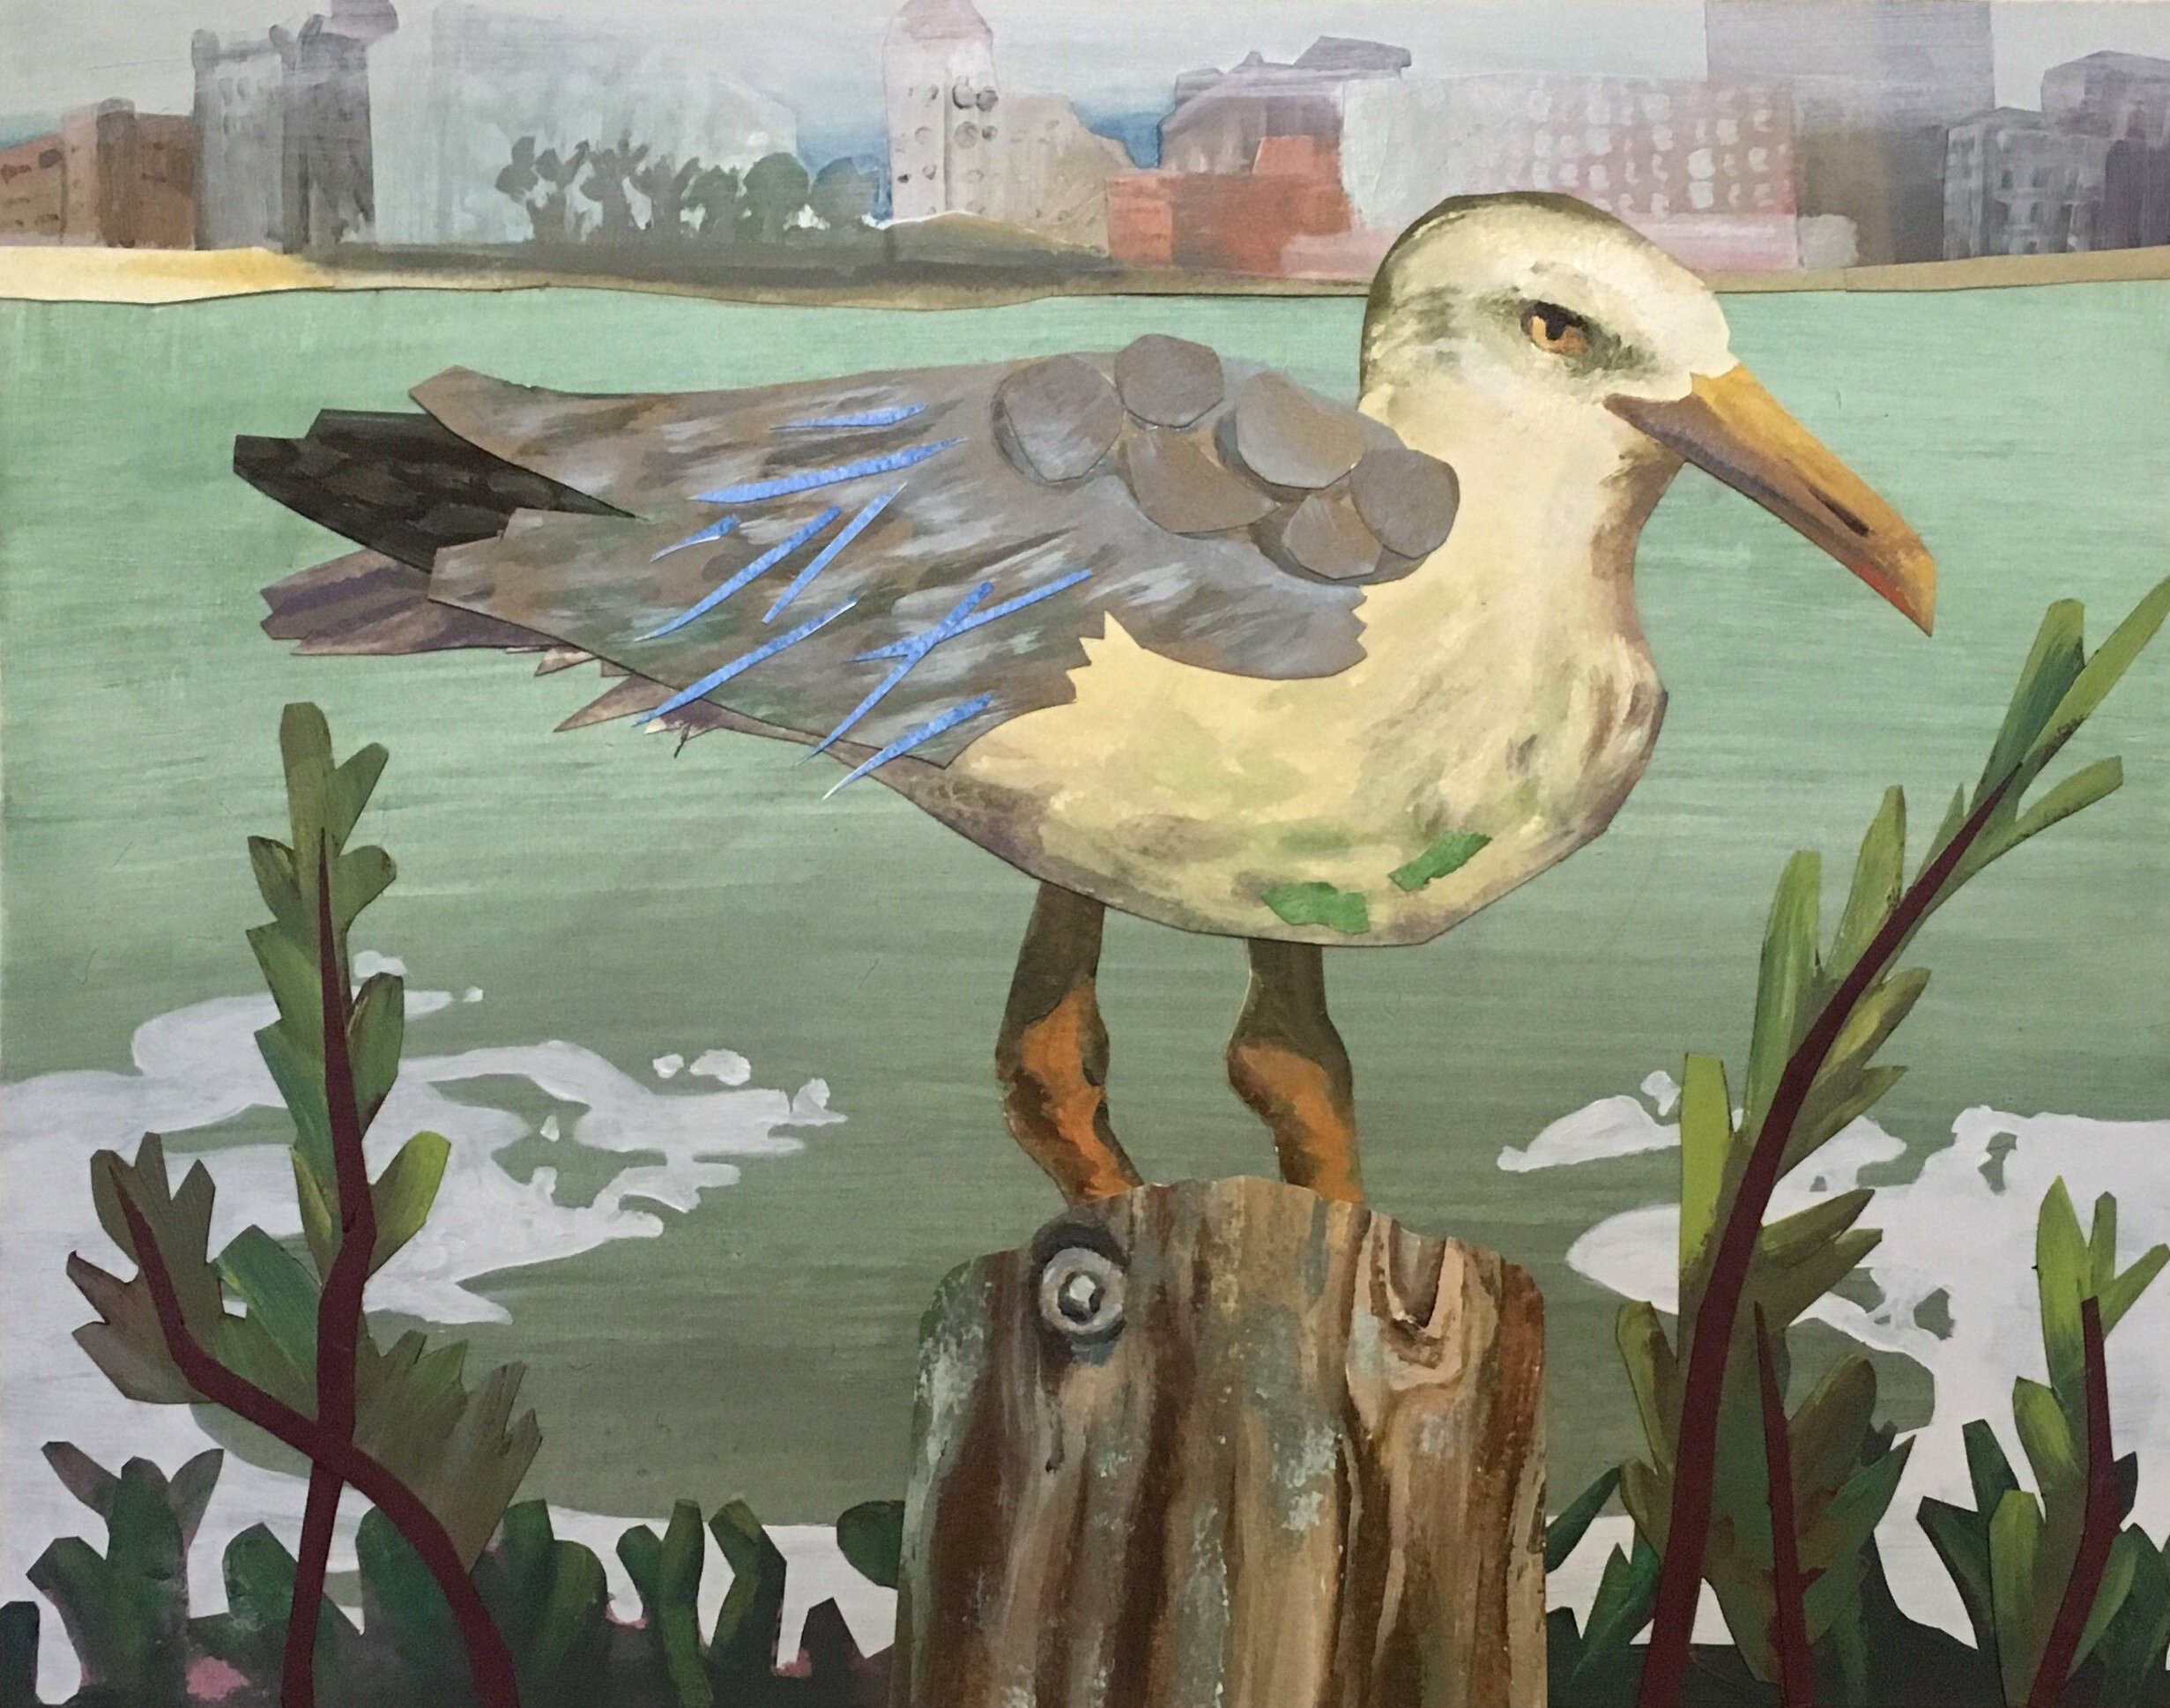  “Seagull with Cityscape 2, 11” x 14”, Acrylic and collage on panel, 2020 